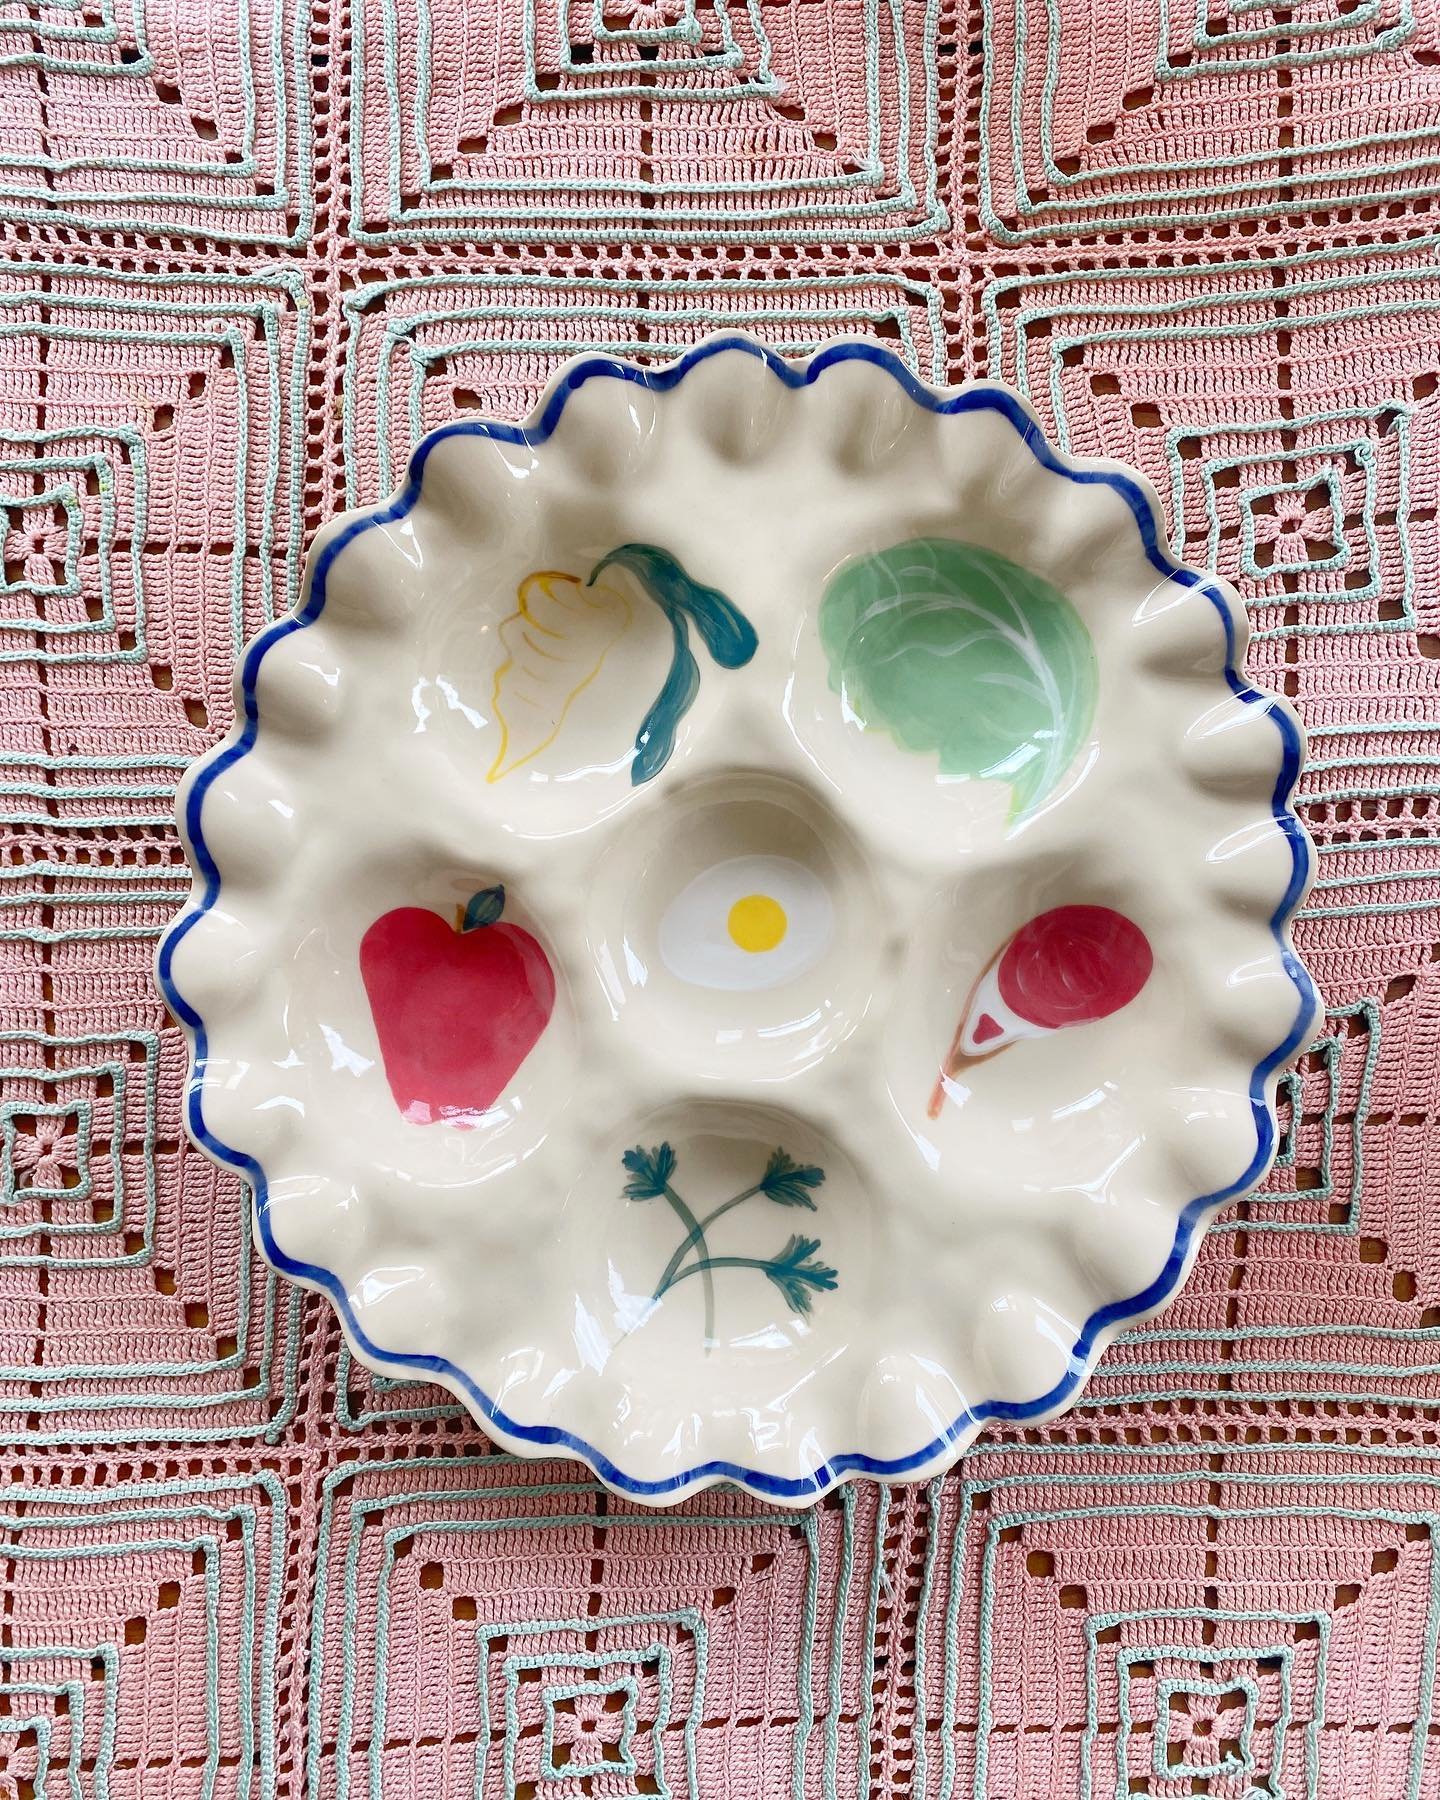 Passover is a time to remember to suffering of our ancestors as well as to recognize all those who are currently suffering today. You can find my Seder Plates on my website now, as well as new Seder Tradition bowls like the Olives for Peace and Orang